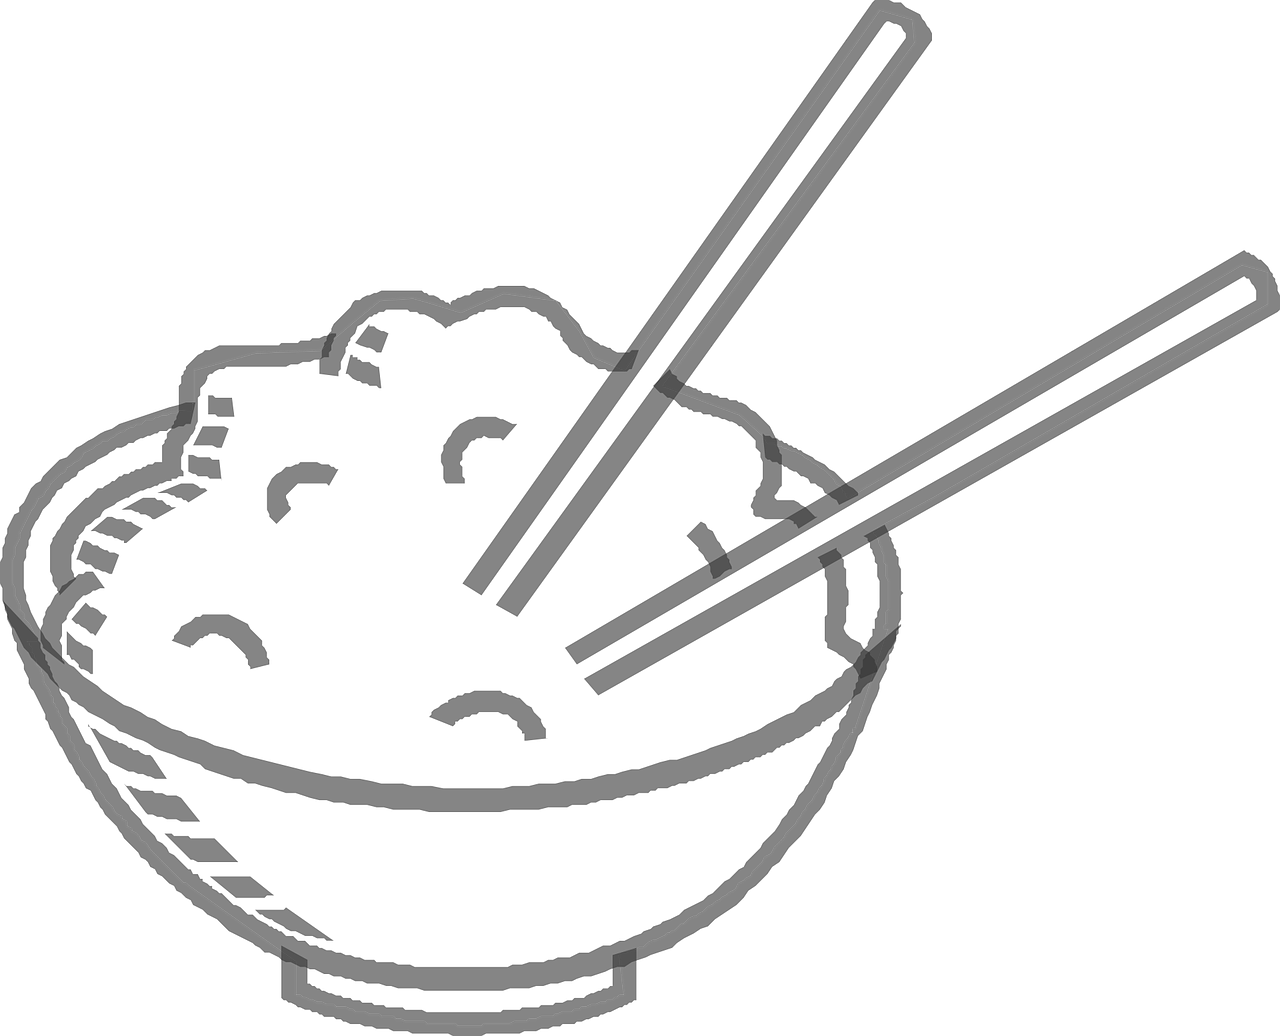 a bowl of rice with chopsticks in it, lineart, pixabay, dark. no text, eating noodles, white, facing left